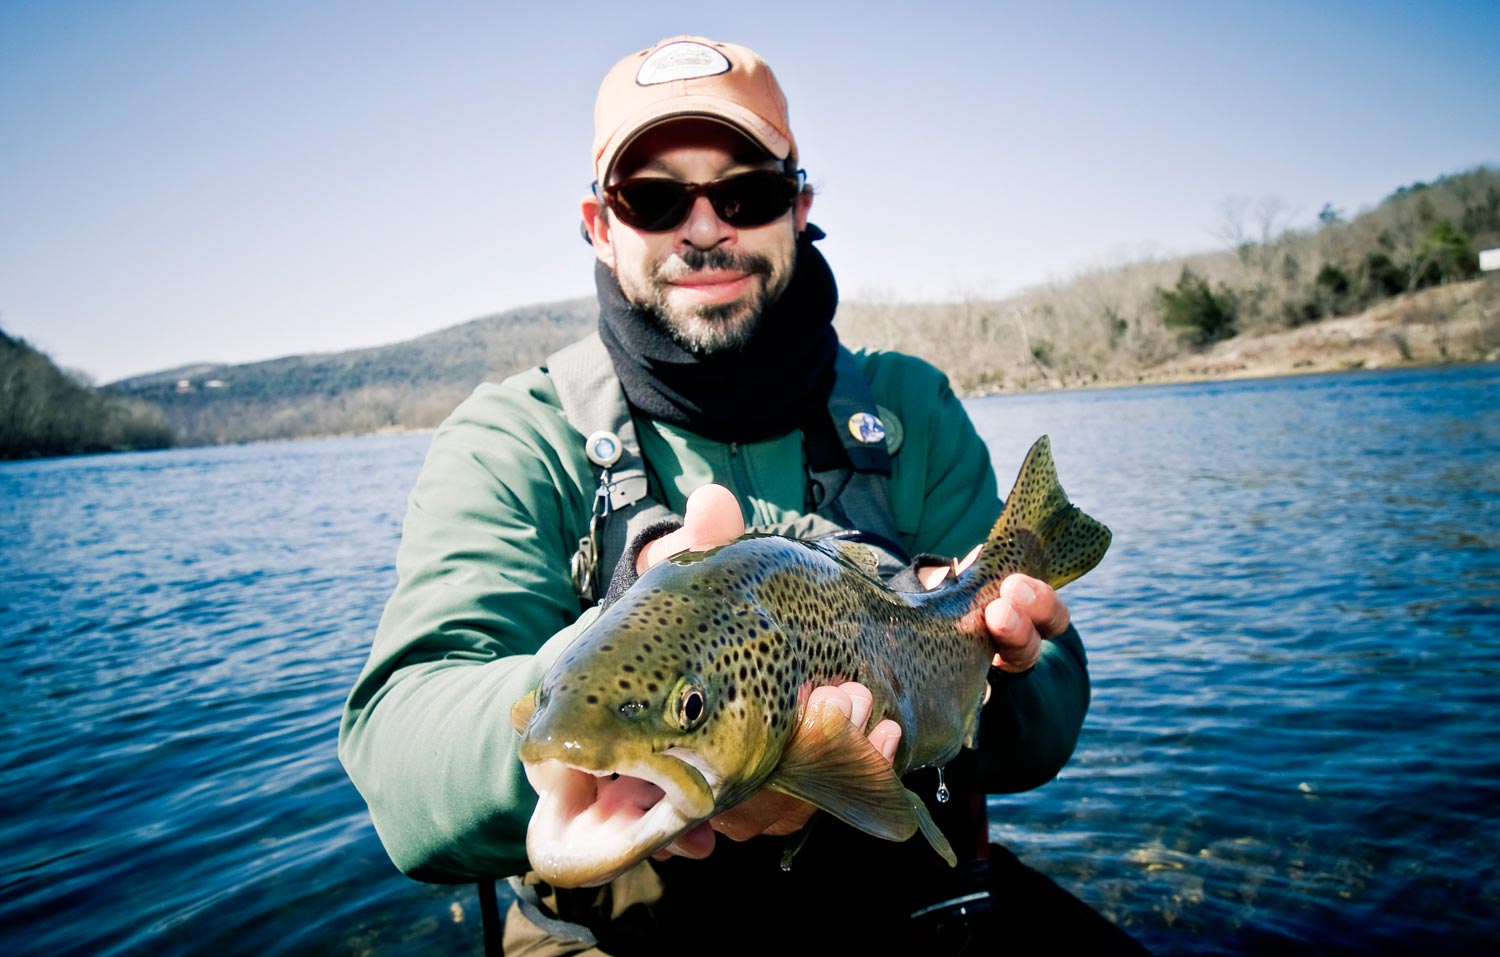 The Ultimate Cold Stopping Fleece Buff - Fly Fishing